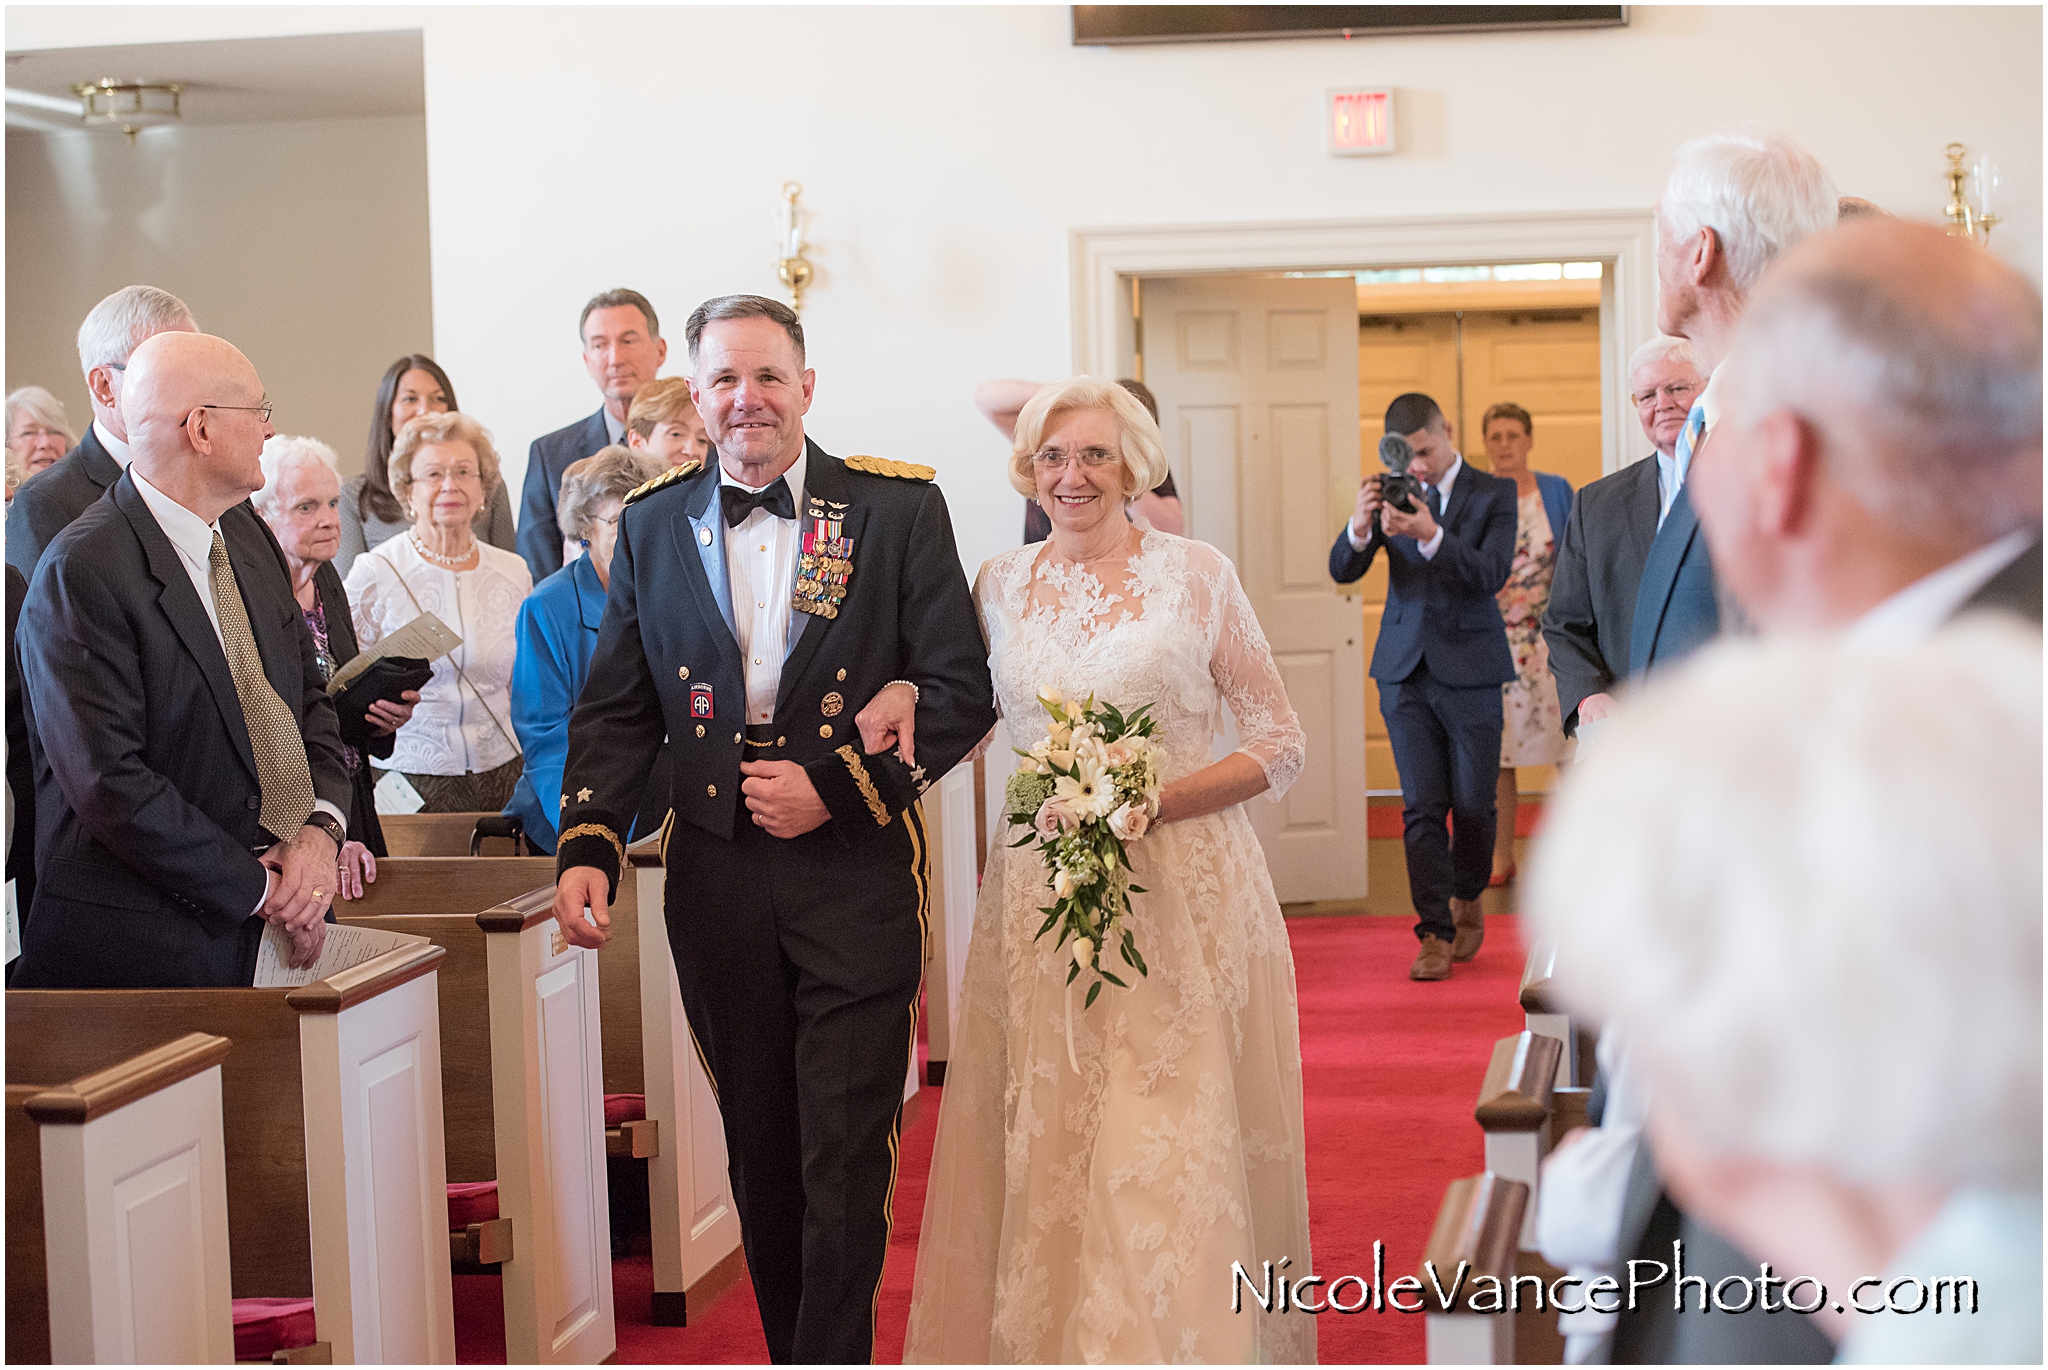 The bride comes down the aisle at Crestwood Presbyterian Church